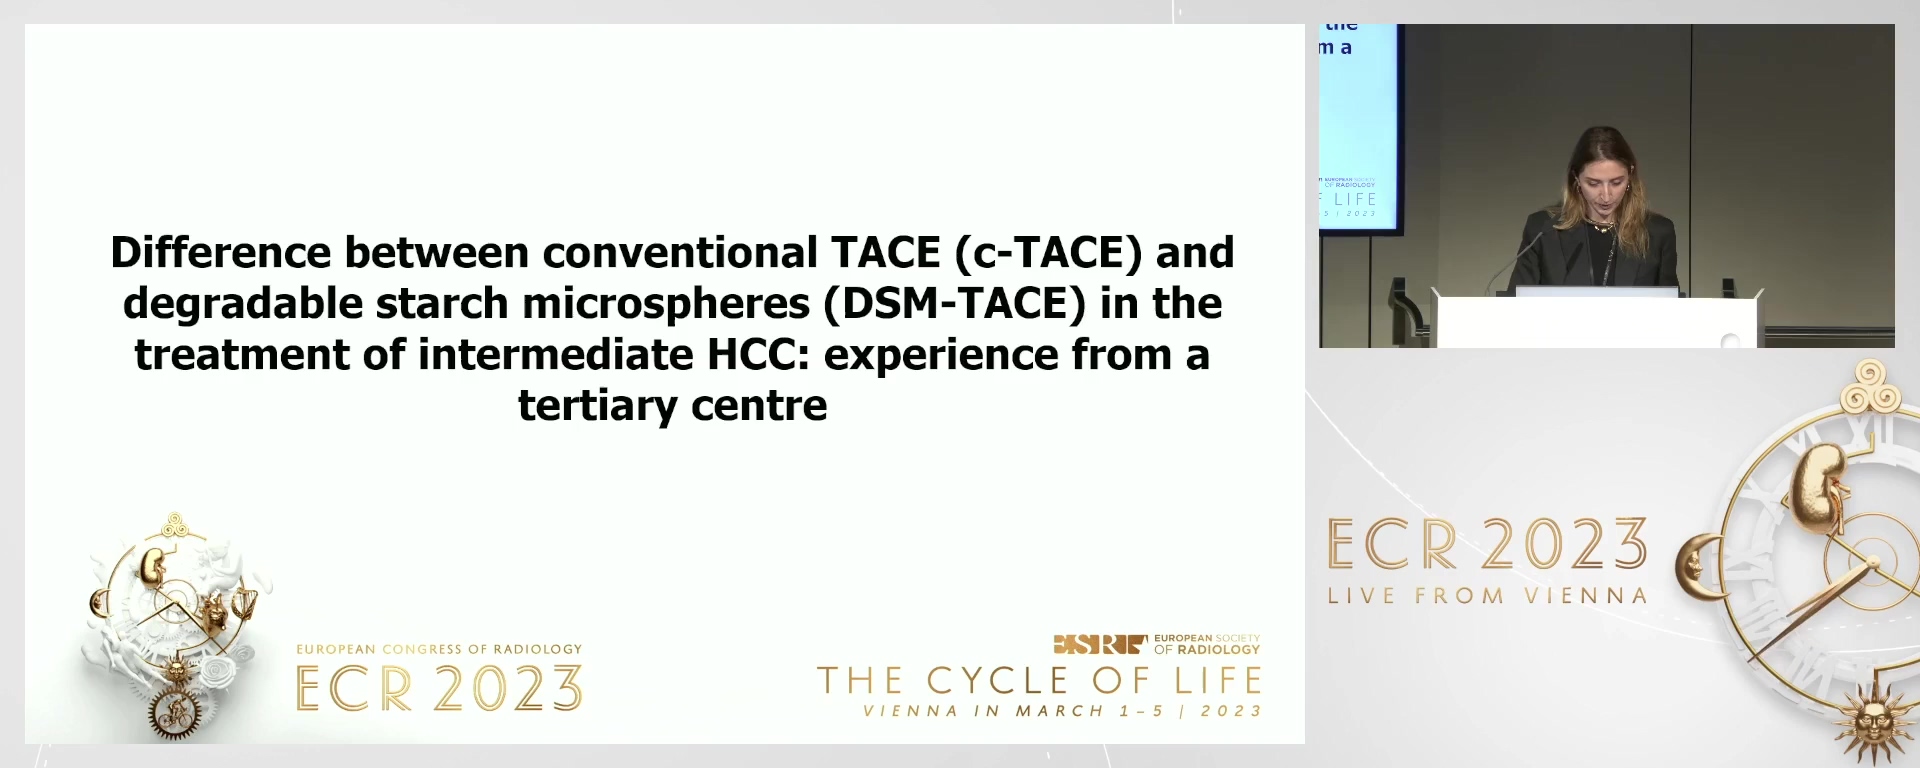 Difference between c-TACE and degradable starch microspheres (DSM-TACE) in the treatment of intermediate HCC: experience from a tertiary centre